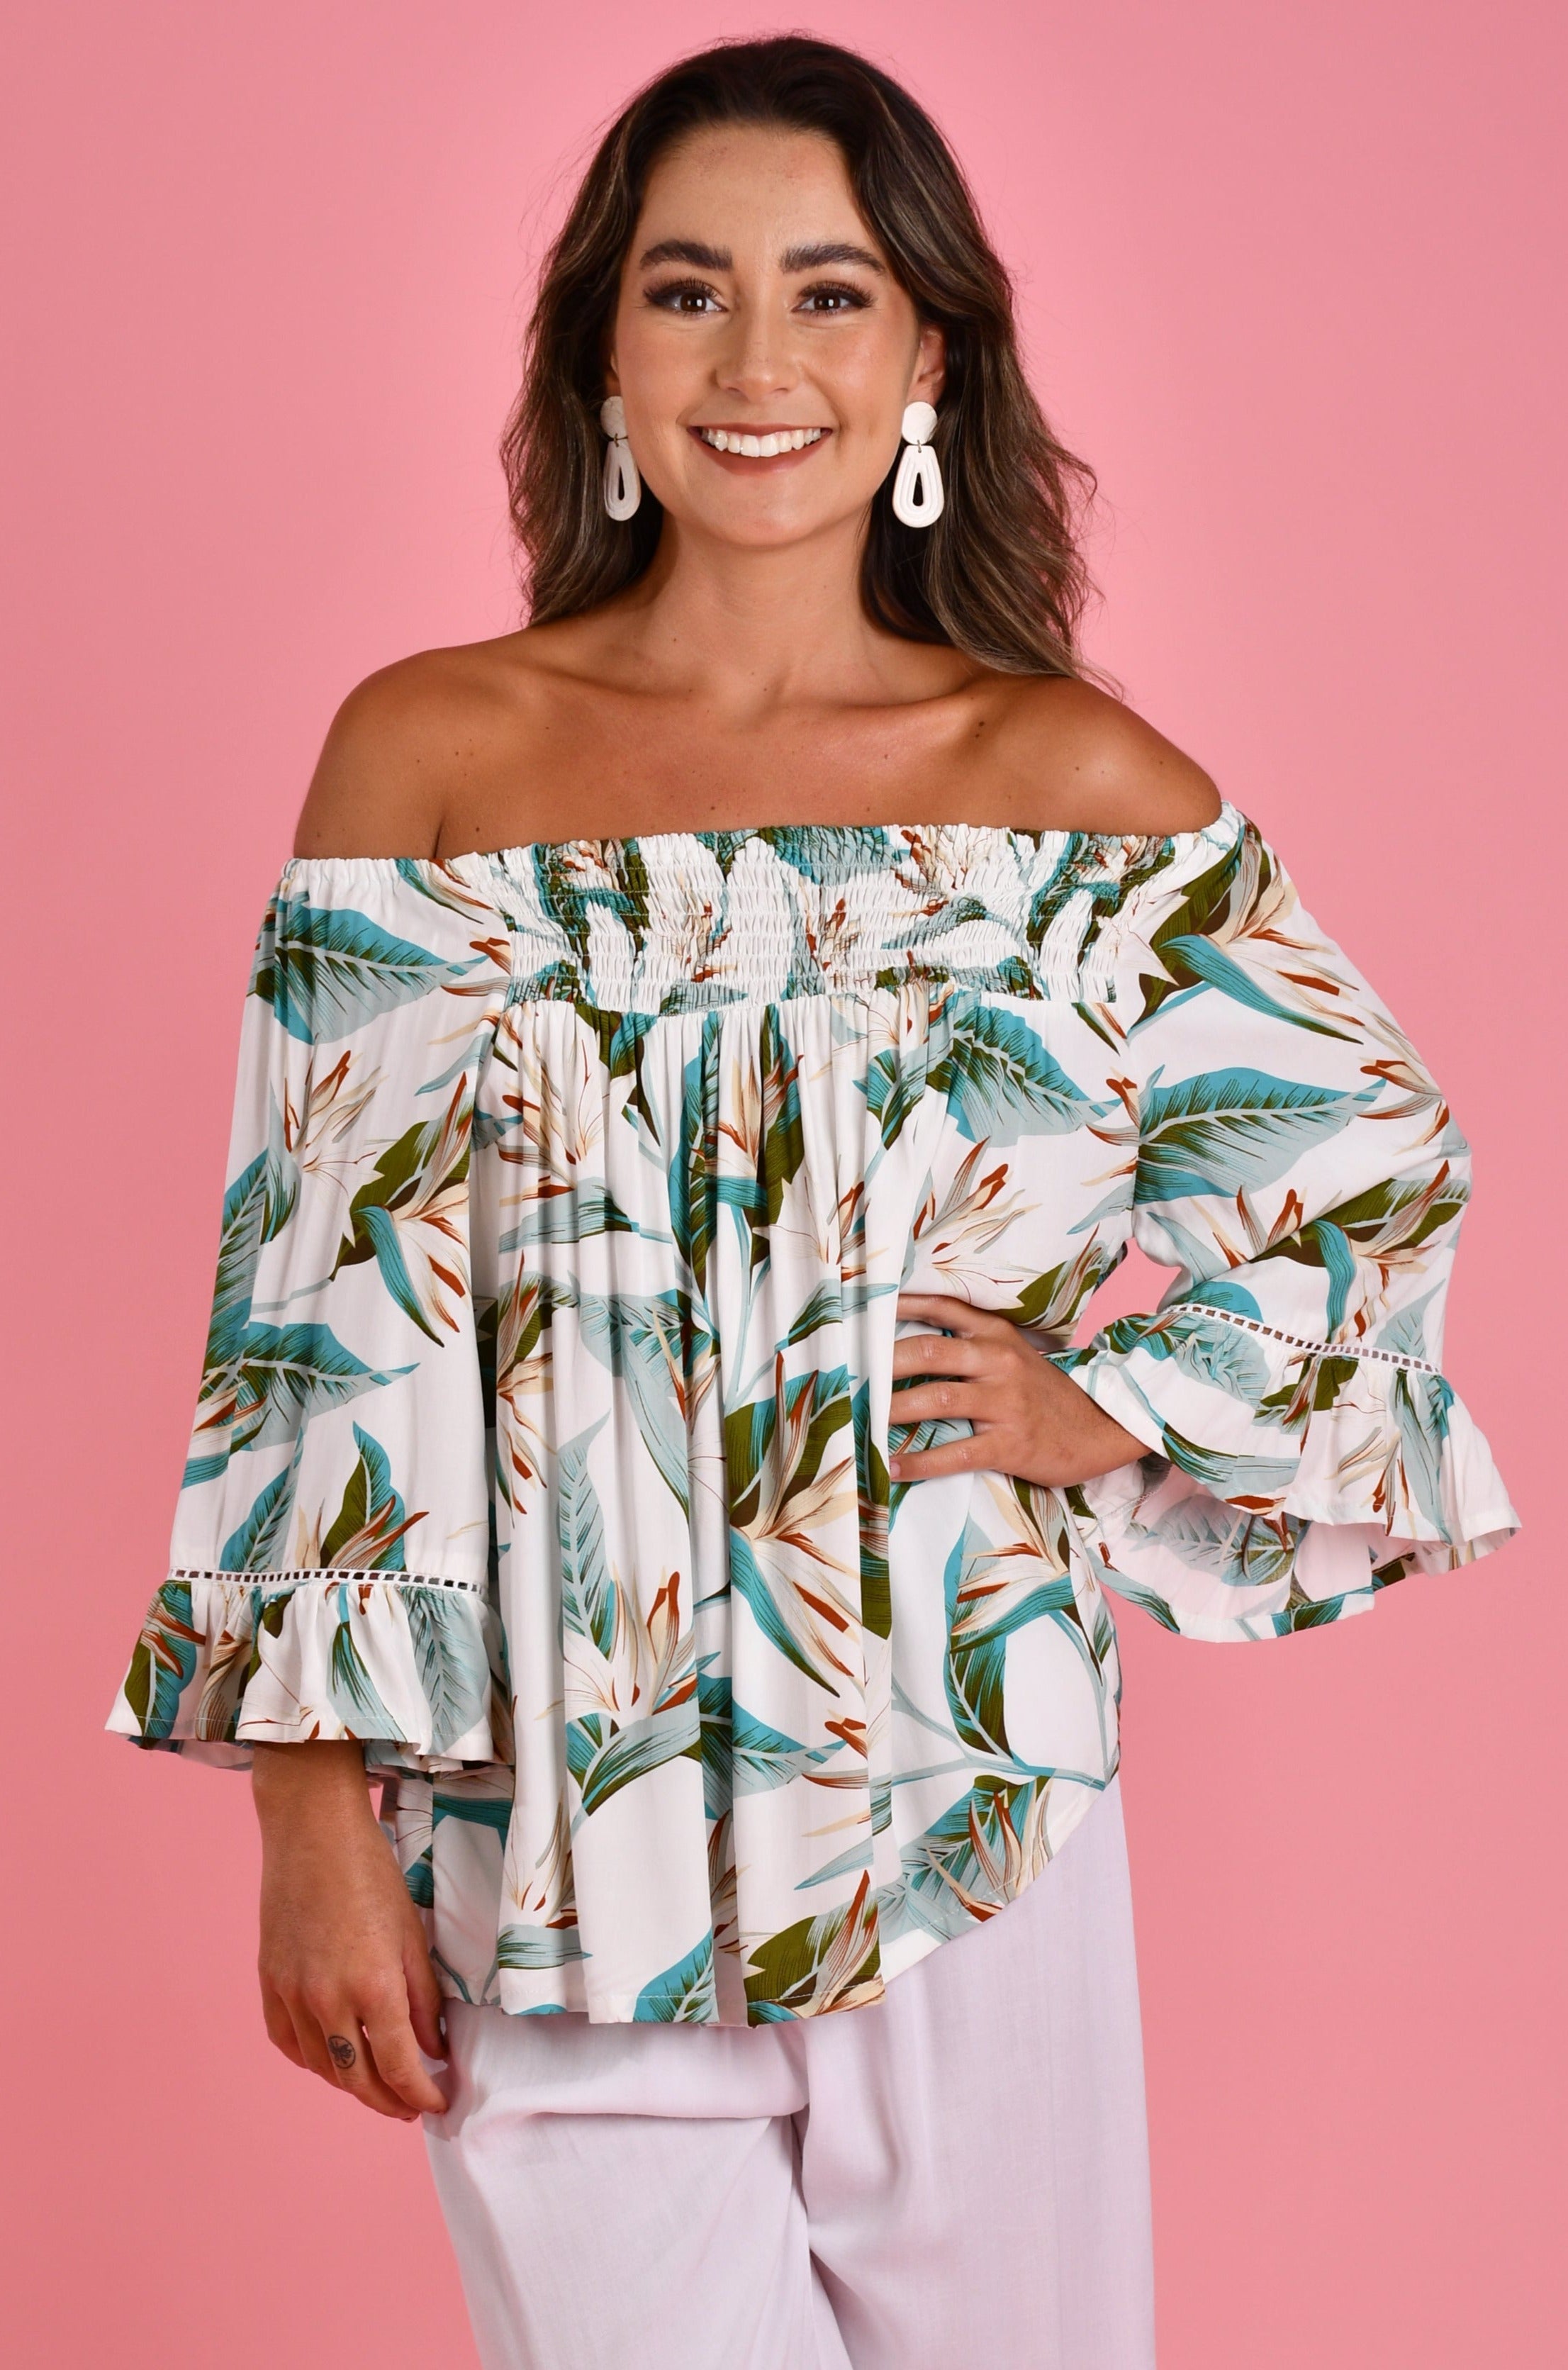 VBLT113 - ROUCHED BELL SLEEVE TOP - WHITE BIRD OF PARADISE